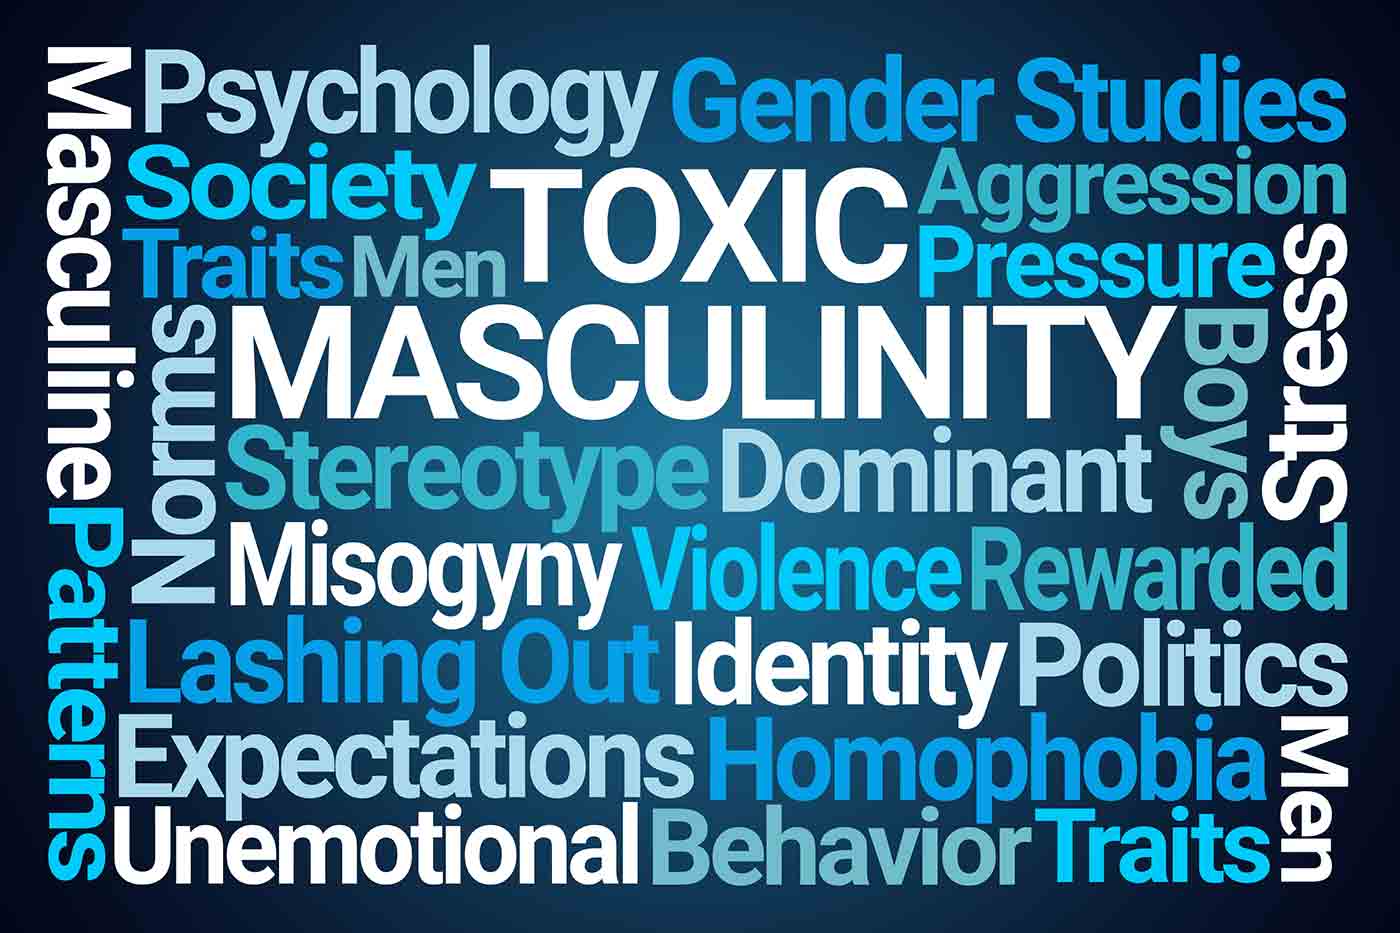 What Is Toxic Masculinity?